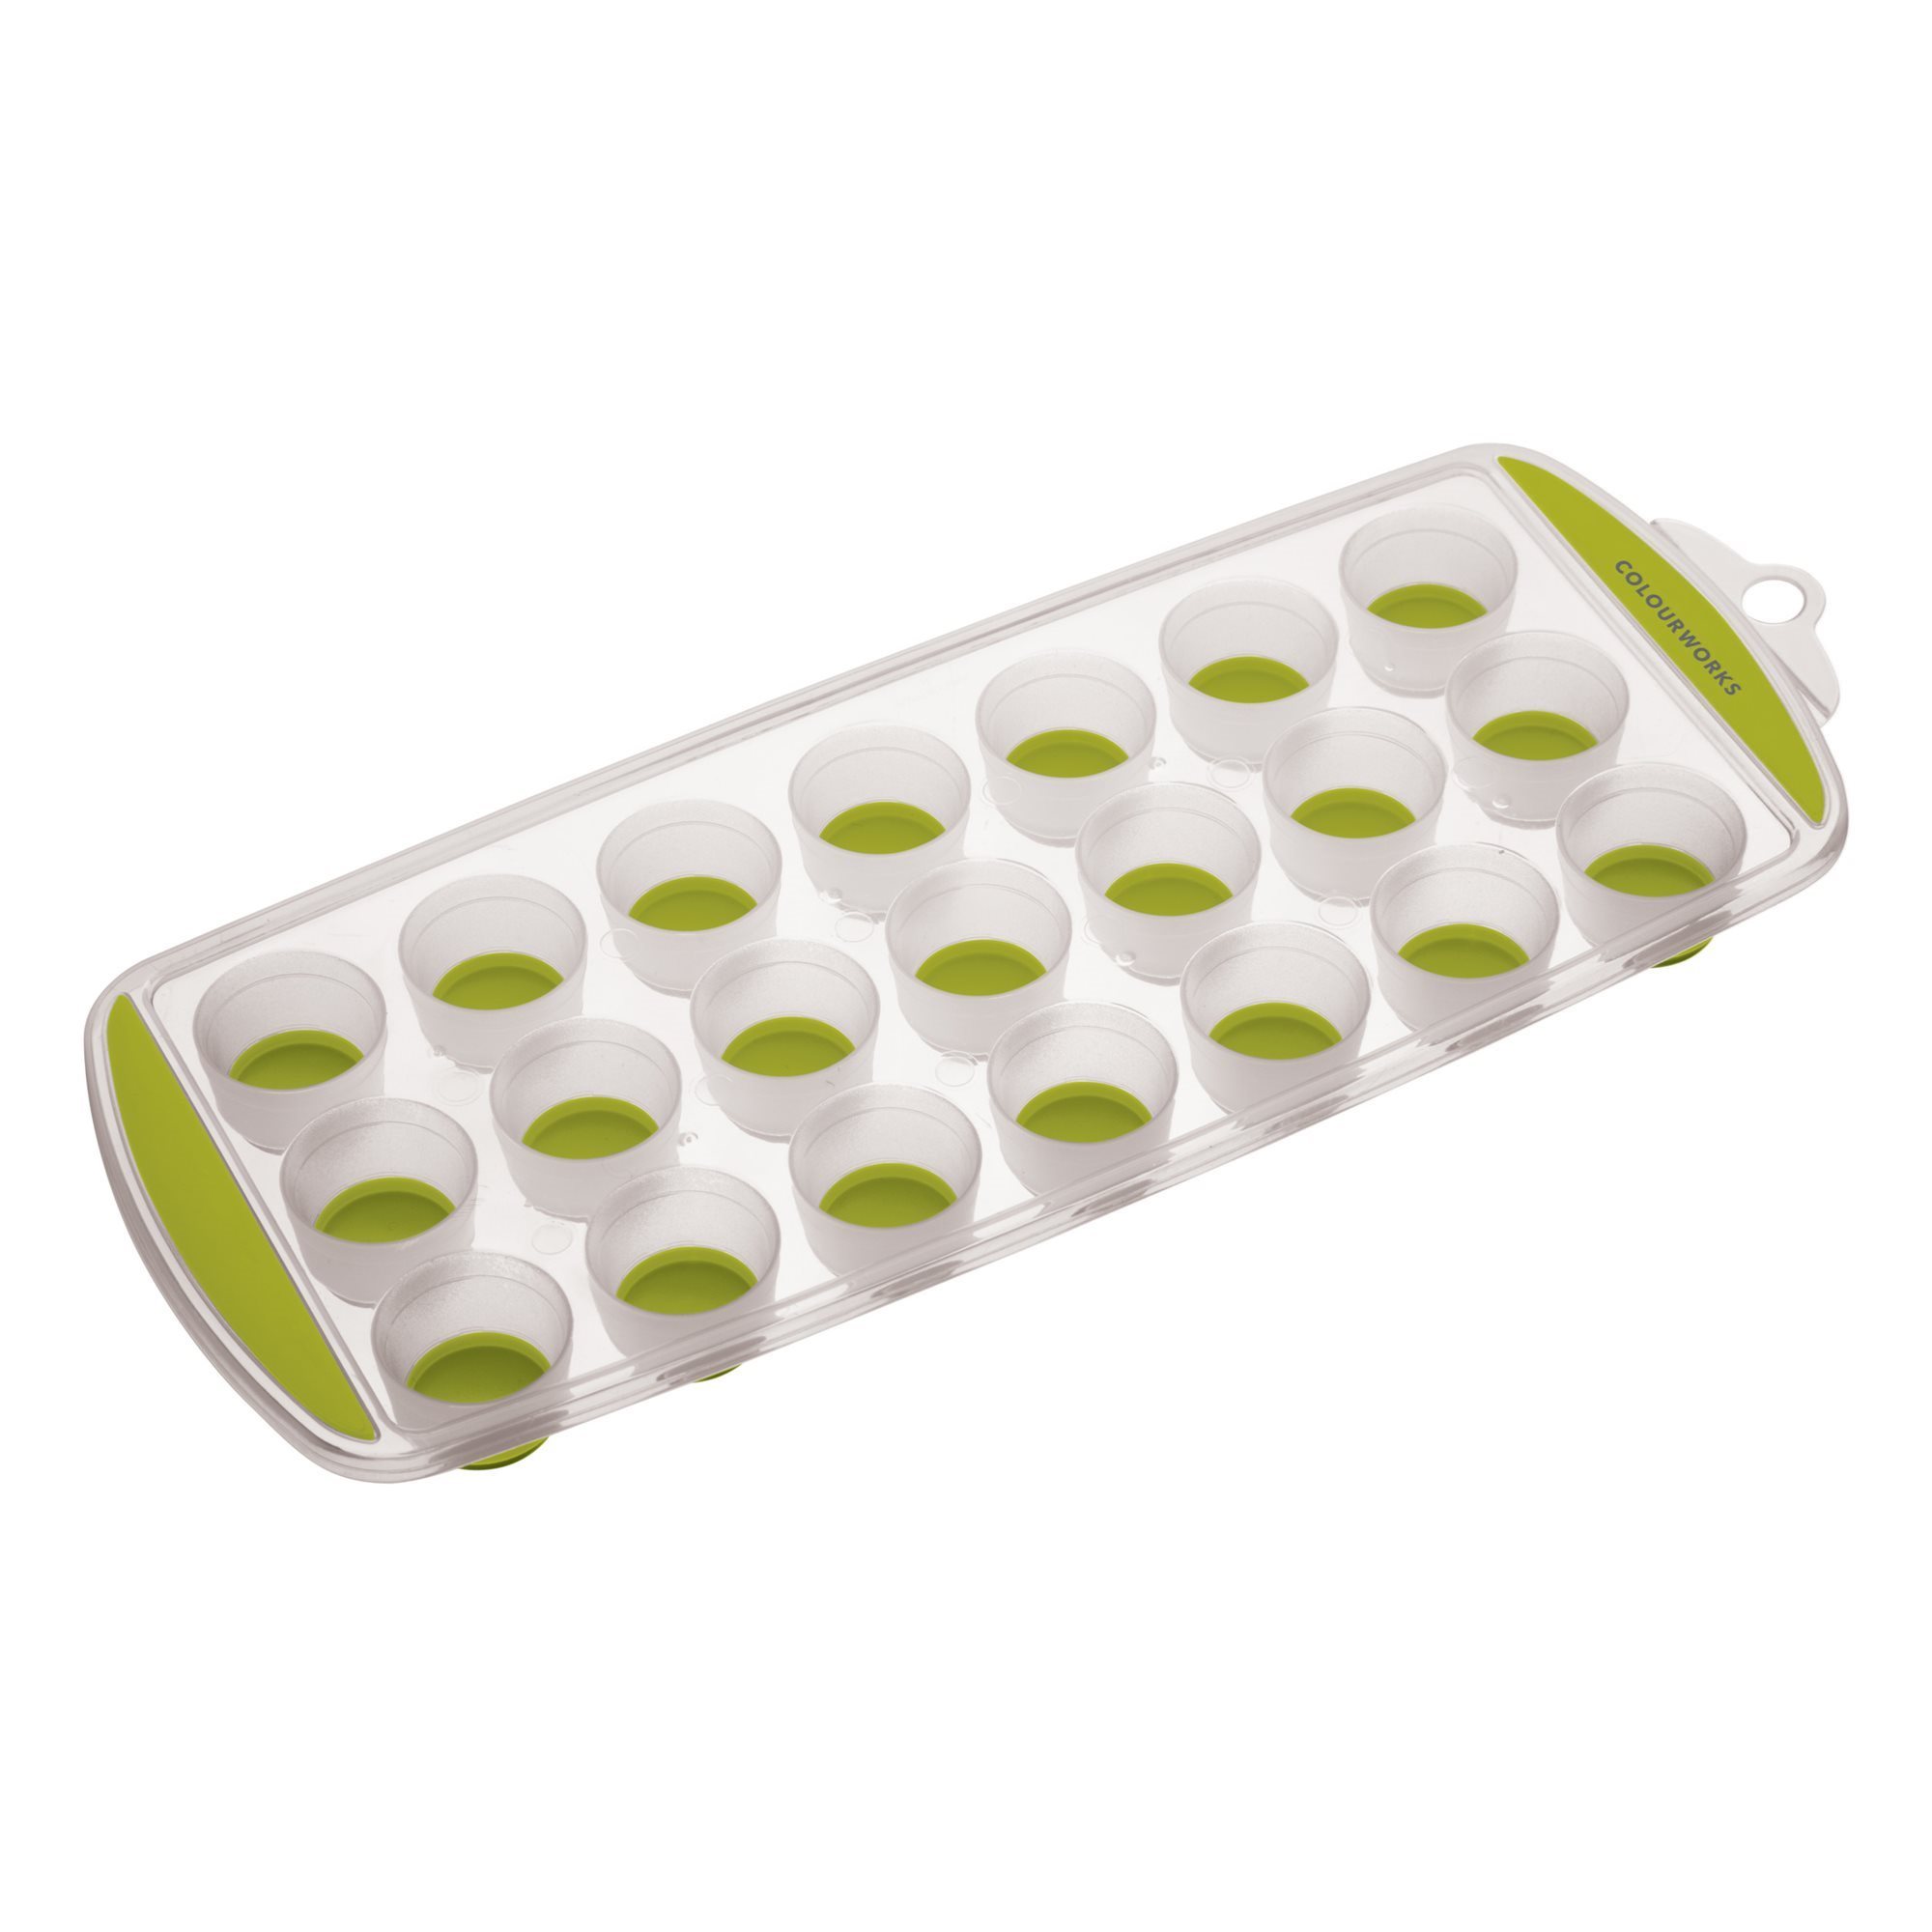 Tray for preparing ice cubes, 28 x 12 cm, silicone, green